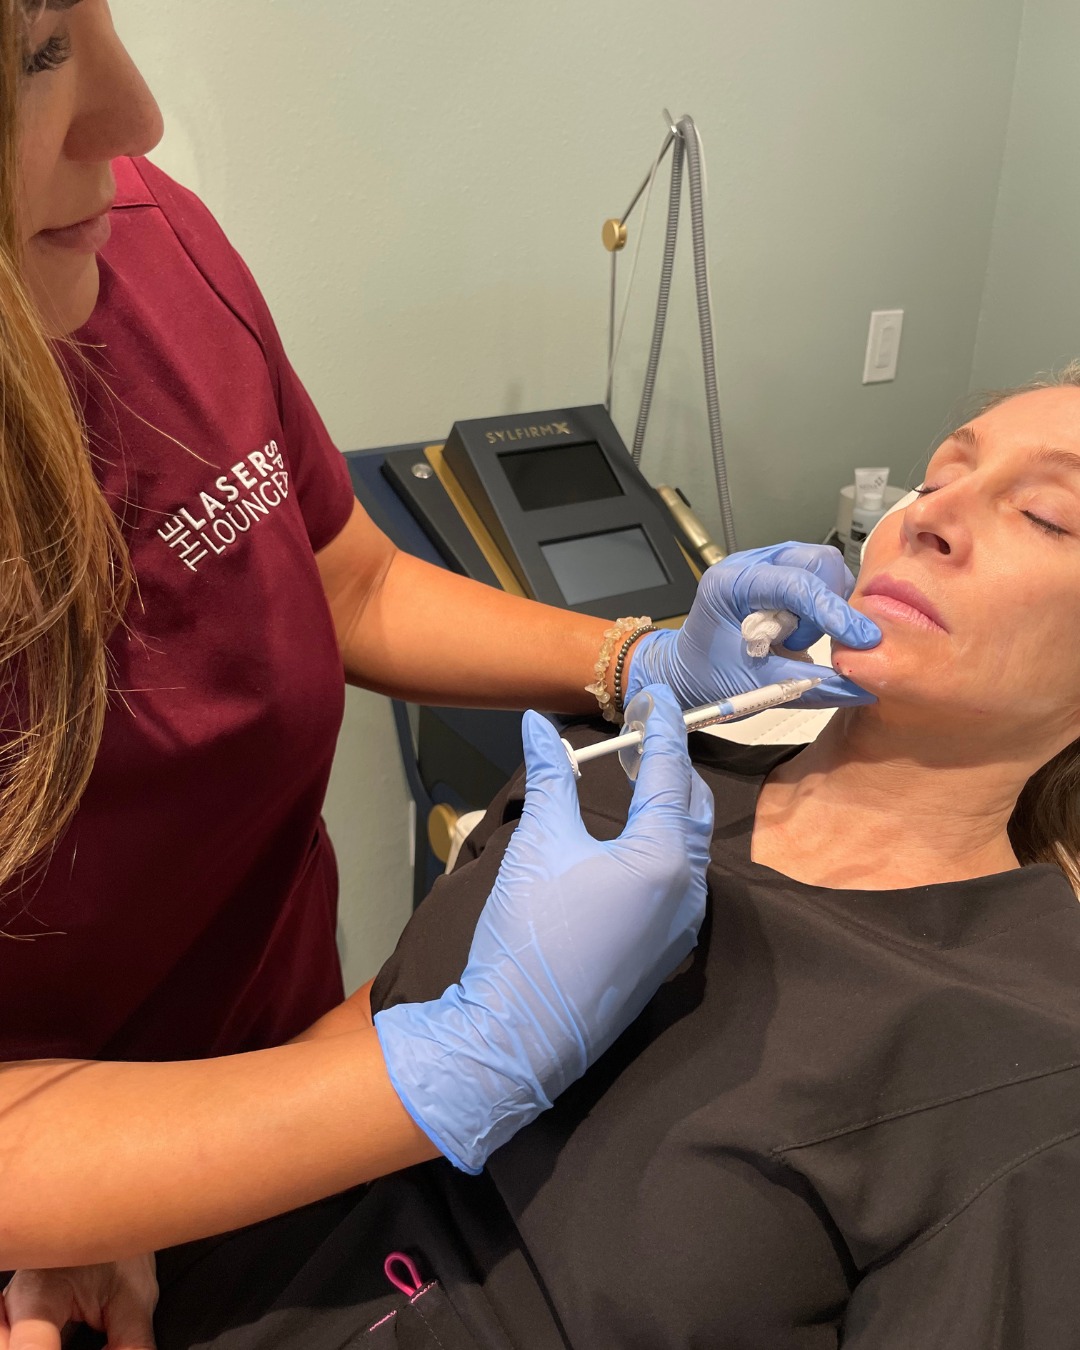 Expert Tips on Aesthetic Injectables from Angie Meinhardt in Sarasota